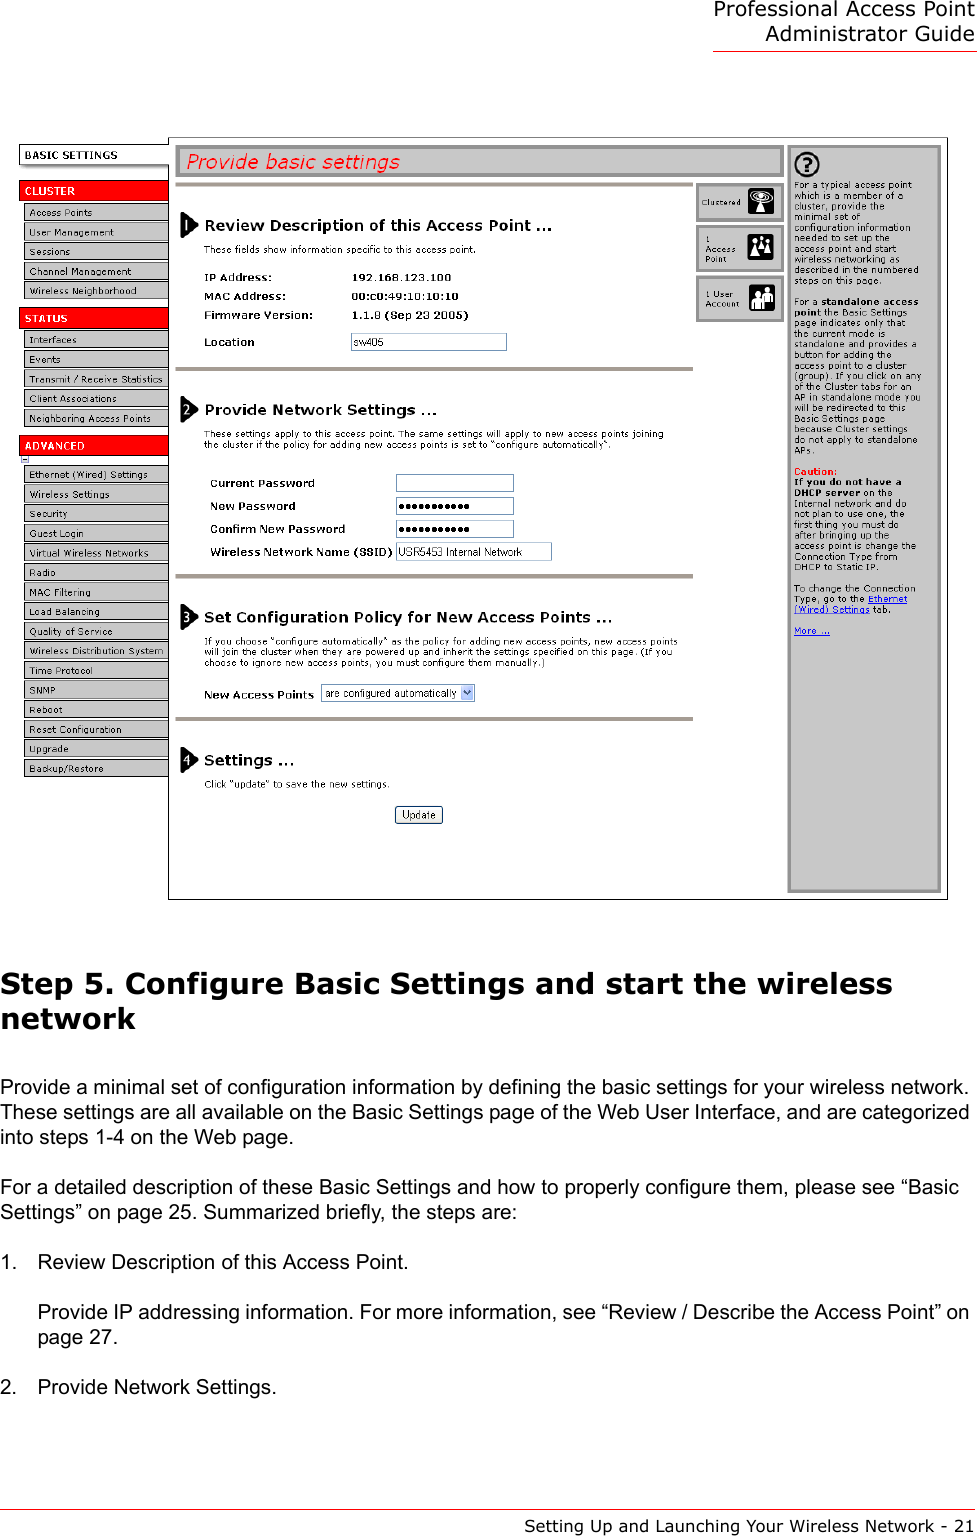 Professional Access Point Administrator GuideSetting Up and Launching Your Wireless Network - 21Step 5. Configure Basic Settings and start the wireless networkProvide a minimal set of configuration information by defining the basic settings for your wireless network. These settings are all available on the Basic Settings page of the Web User Interface, and are categorized into steps 1-4 on the Web page.For a detailed description of these Basic Settings and how to properly configure them, please see “Basic Settings” on page 25. Summarized briefly, the steps are:1. Review Description of this Access Point.Provide IP addressing information. For more information, see “Review / Describe the Access Point” on page 27.2. Provide Network Settings.